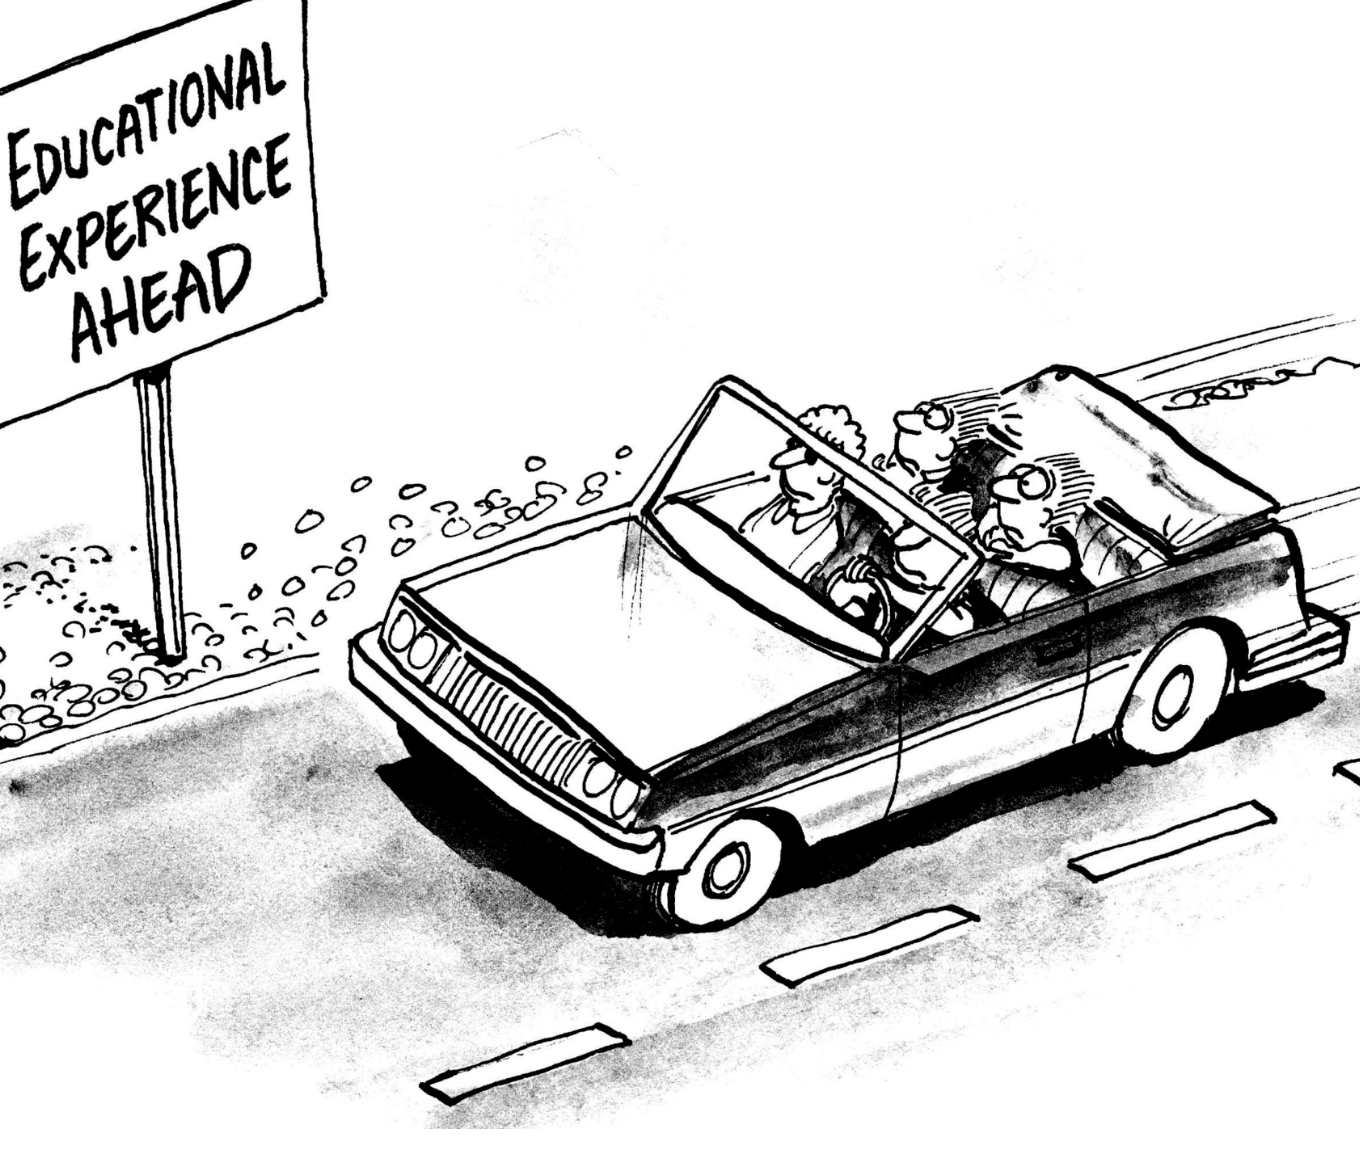 cartoon image of people in a car driving past sign reading - Educational Experience Ahead